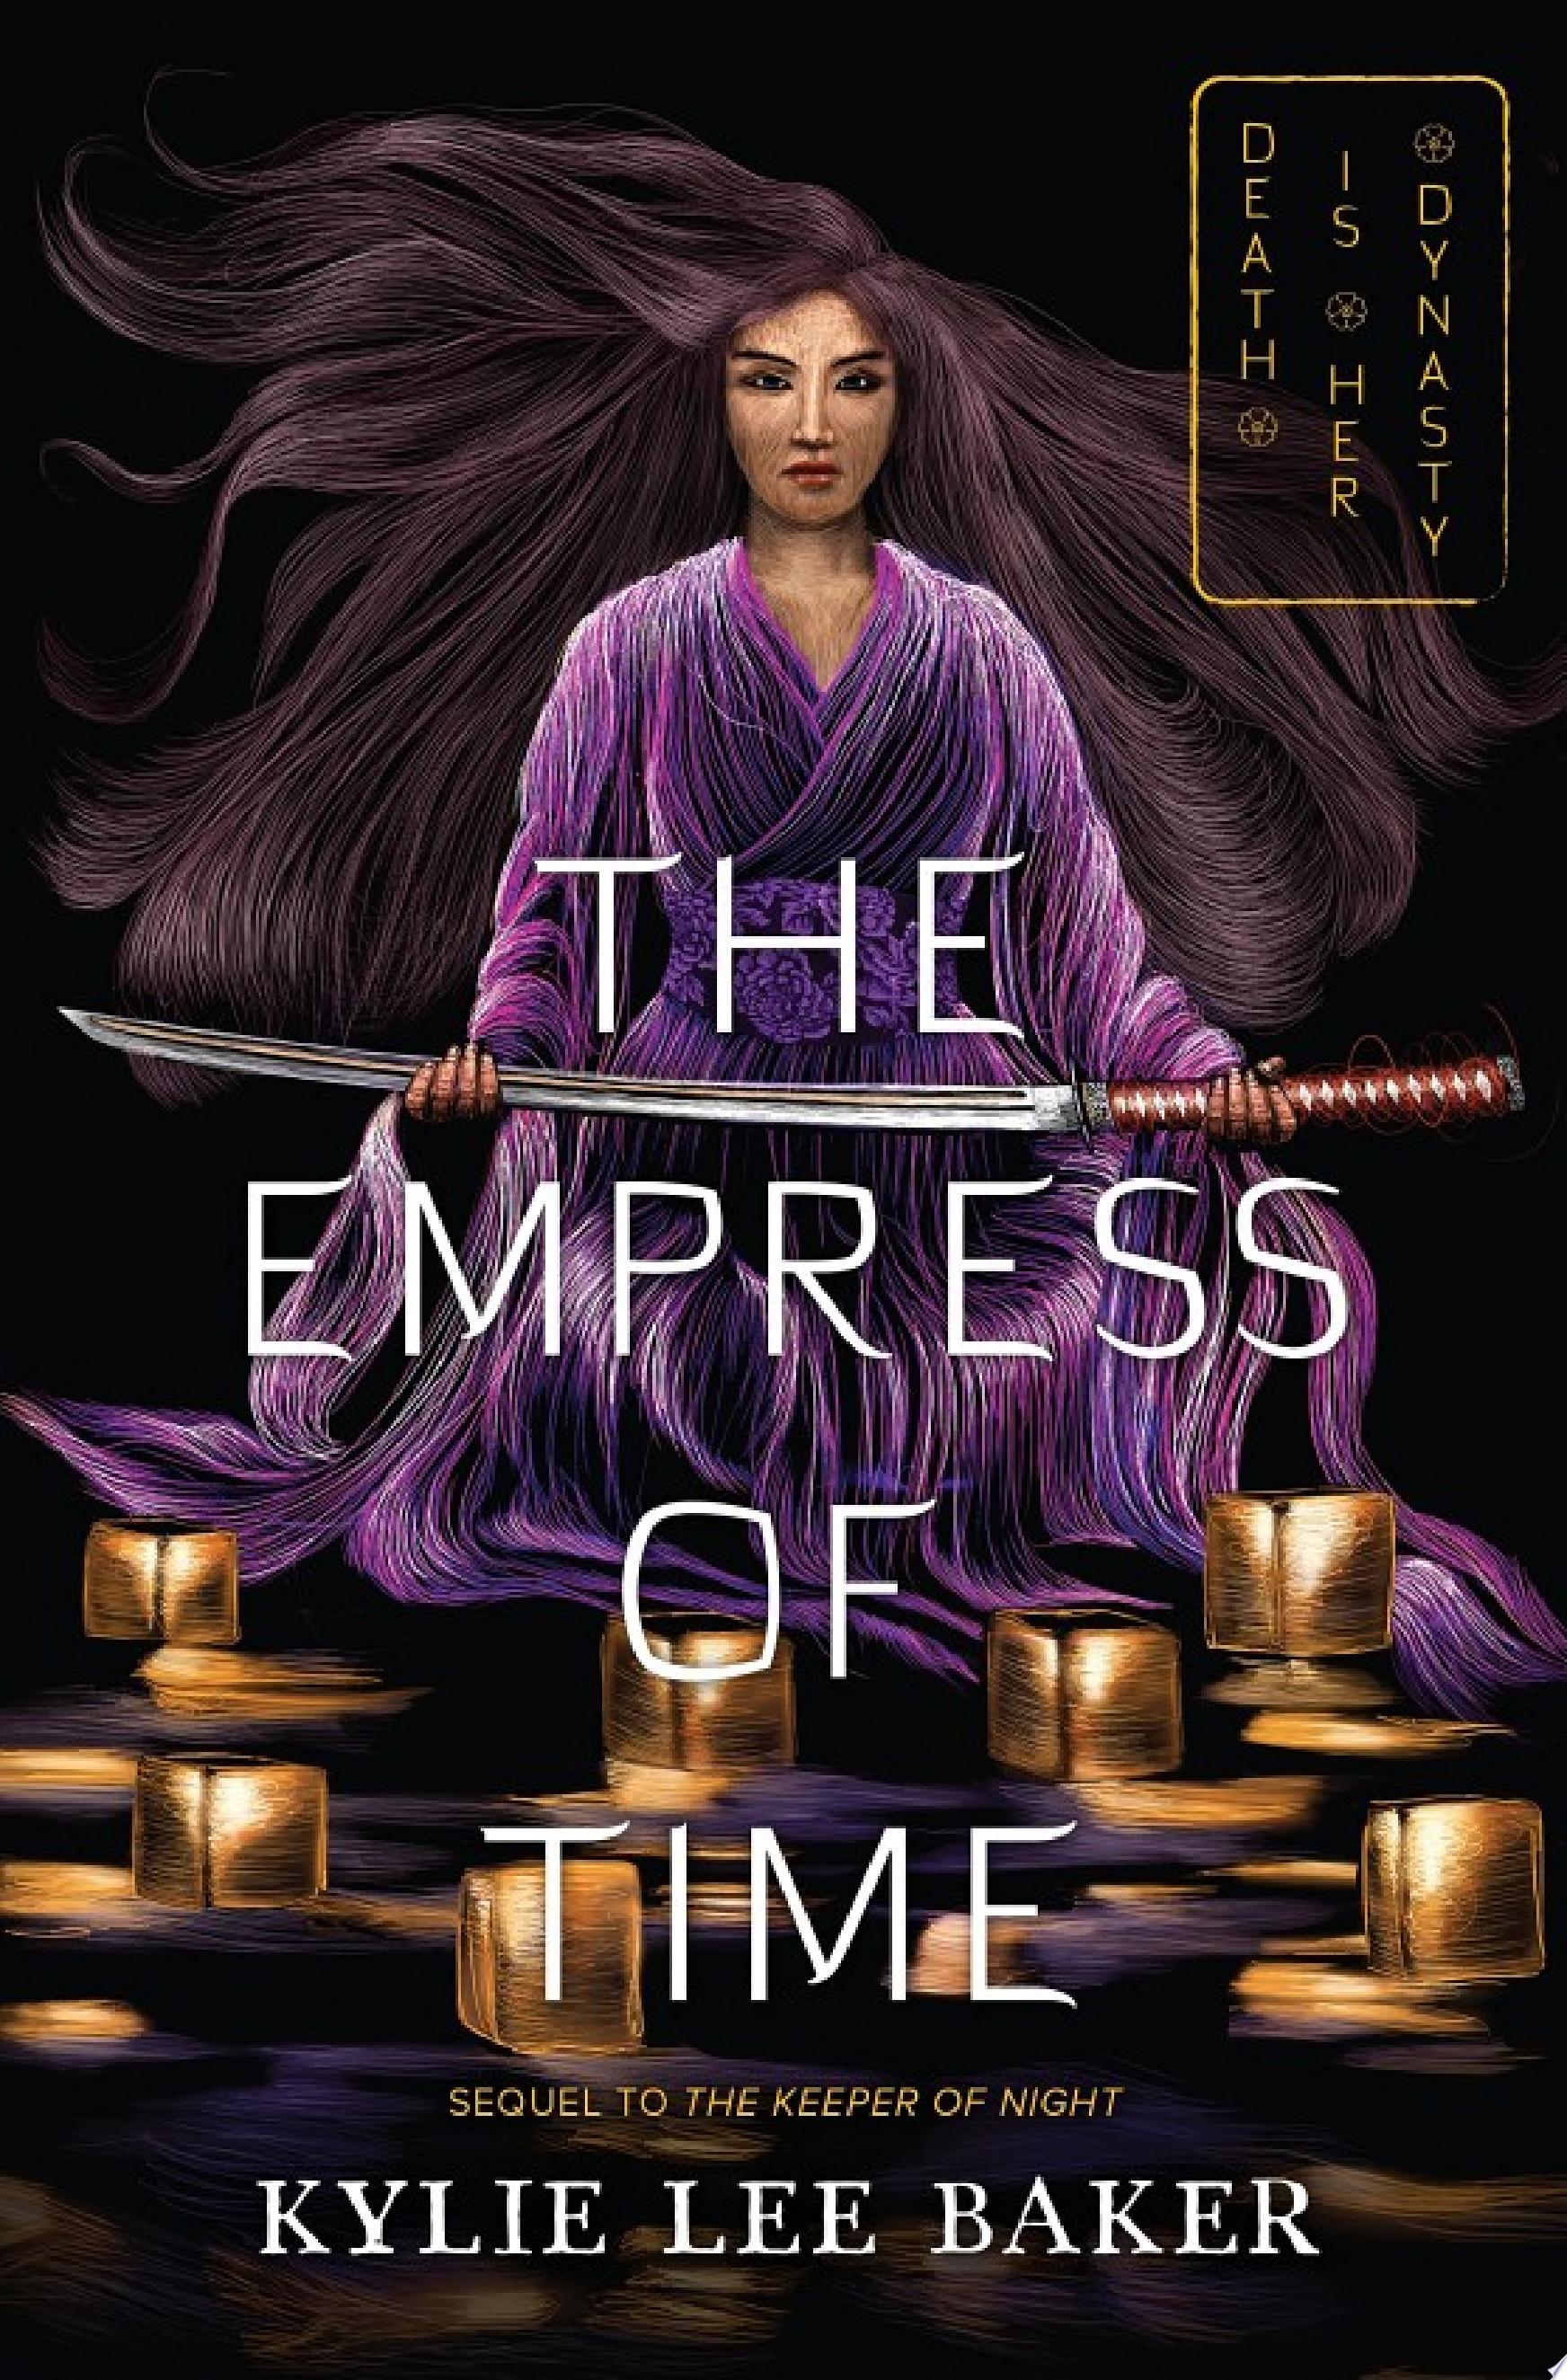 Image for "The Empress of Time"